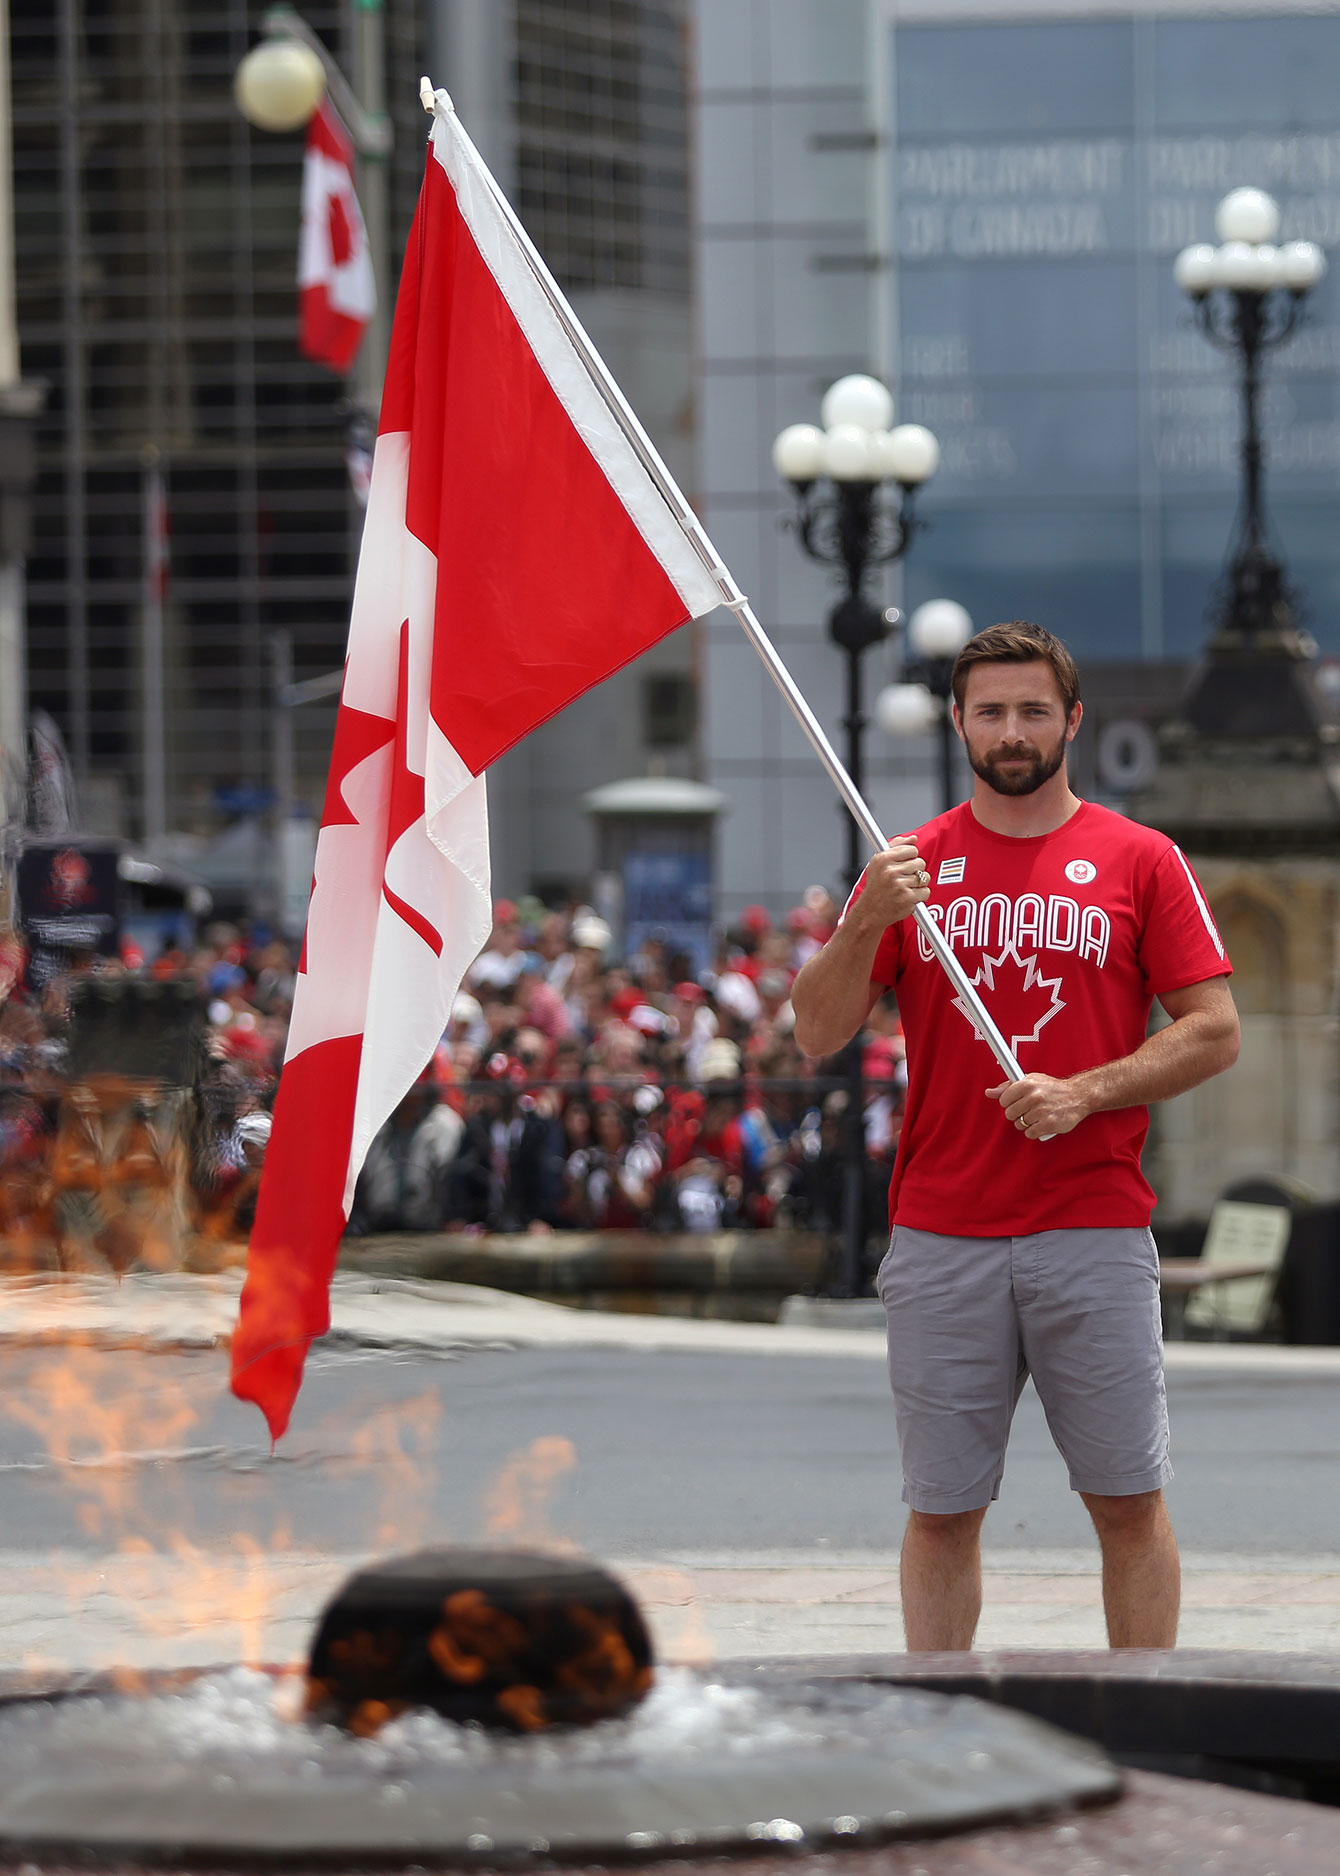 Mark Oldershaw stands with the flag in front of the Centennial Flame at Parliament Hill, on the day he was named Team Canada flag bearer for the Pan Am Games on July 1, 2015  (Greg Kolz for Canadian Olympic Team). 